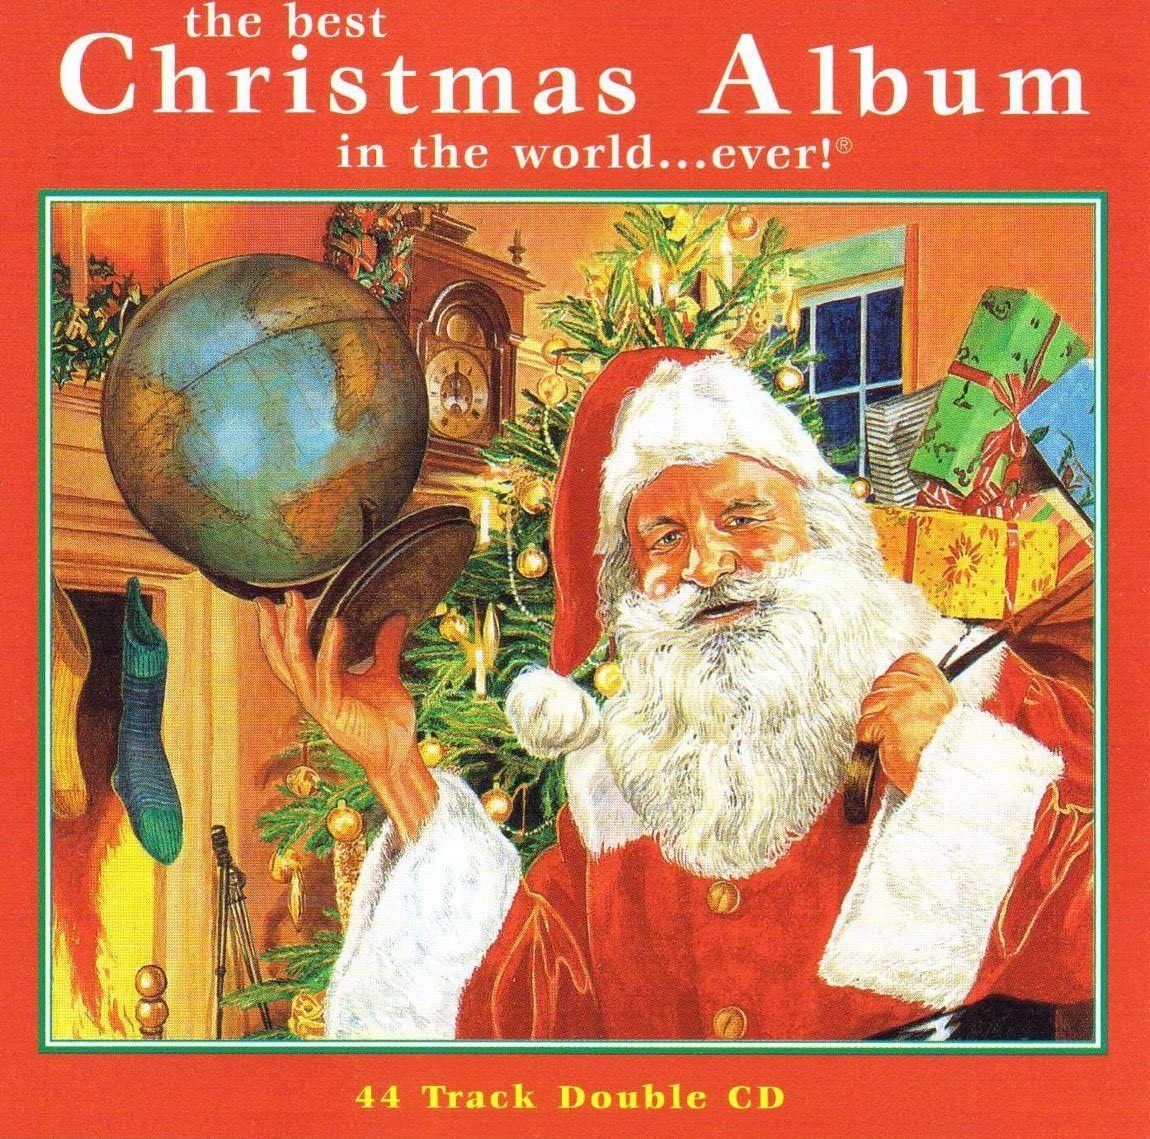 Best Christmas Album in the World Ever　Various Artists (アーティスト)　輸入盤CD_画像1